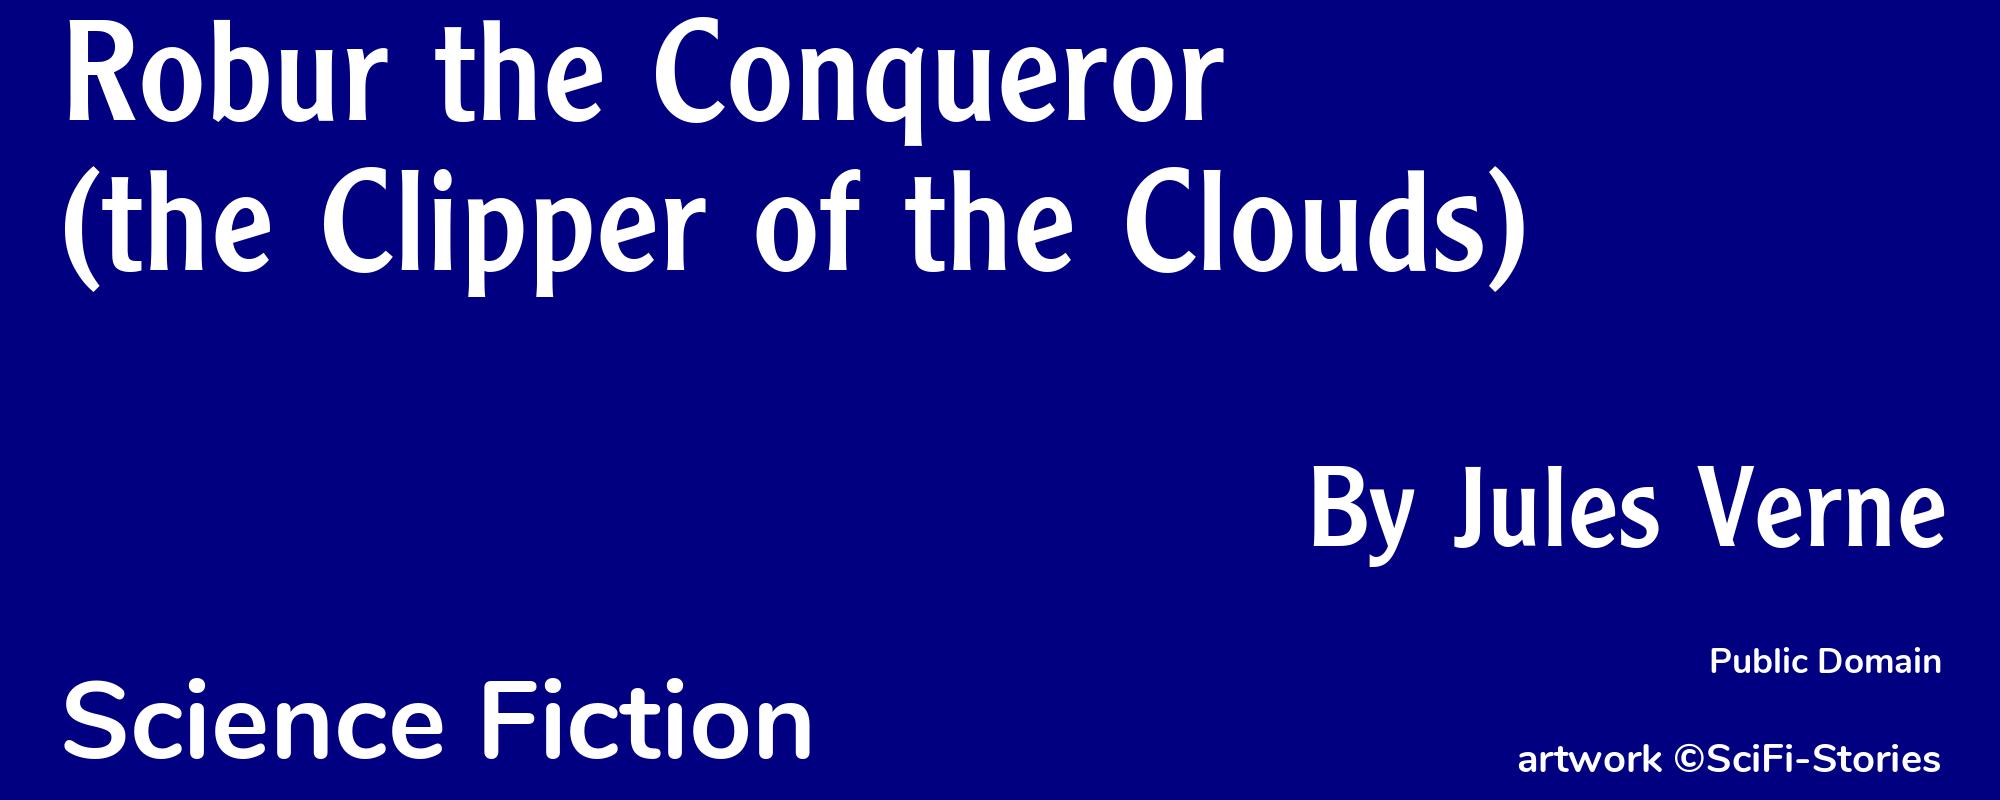 Robur the Conqueror (the Clipper of the Clouds) - Cover